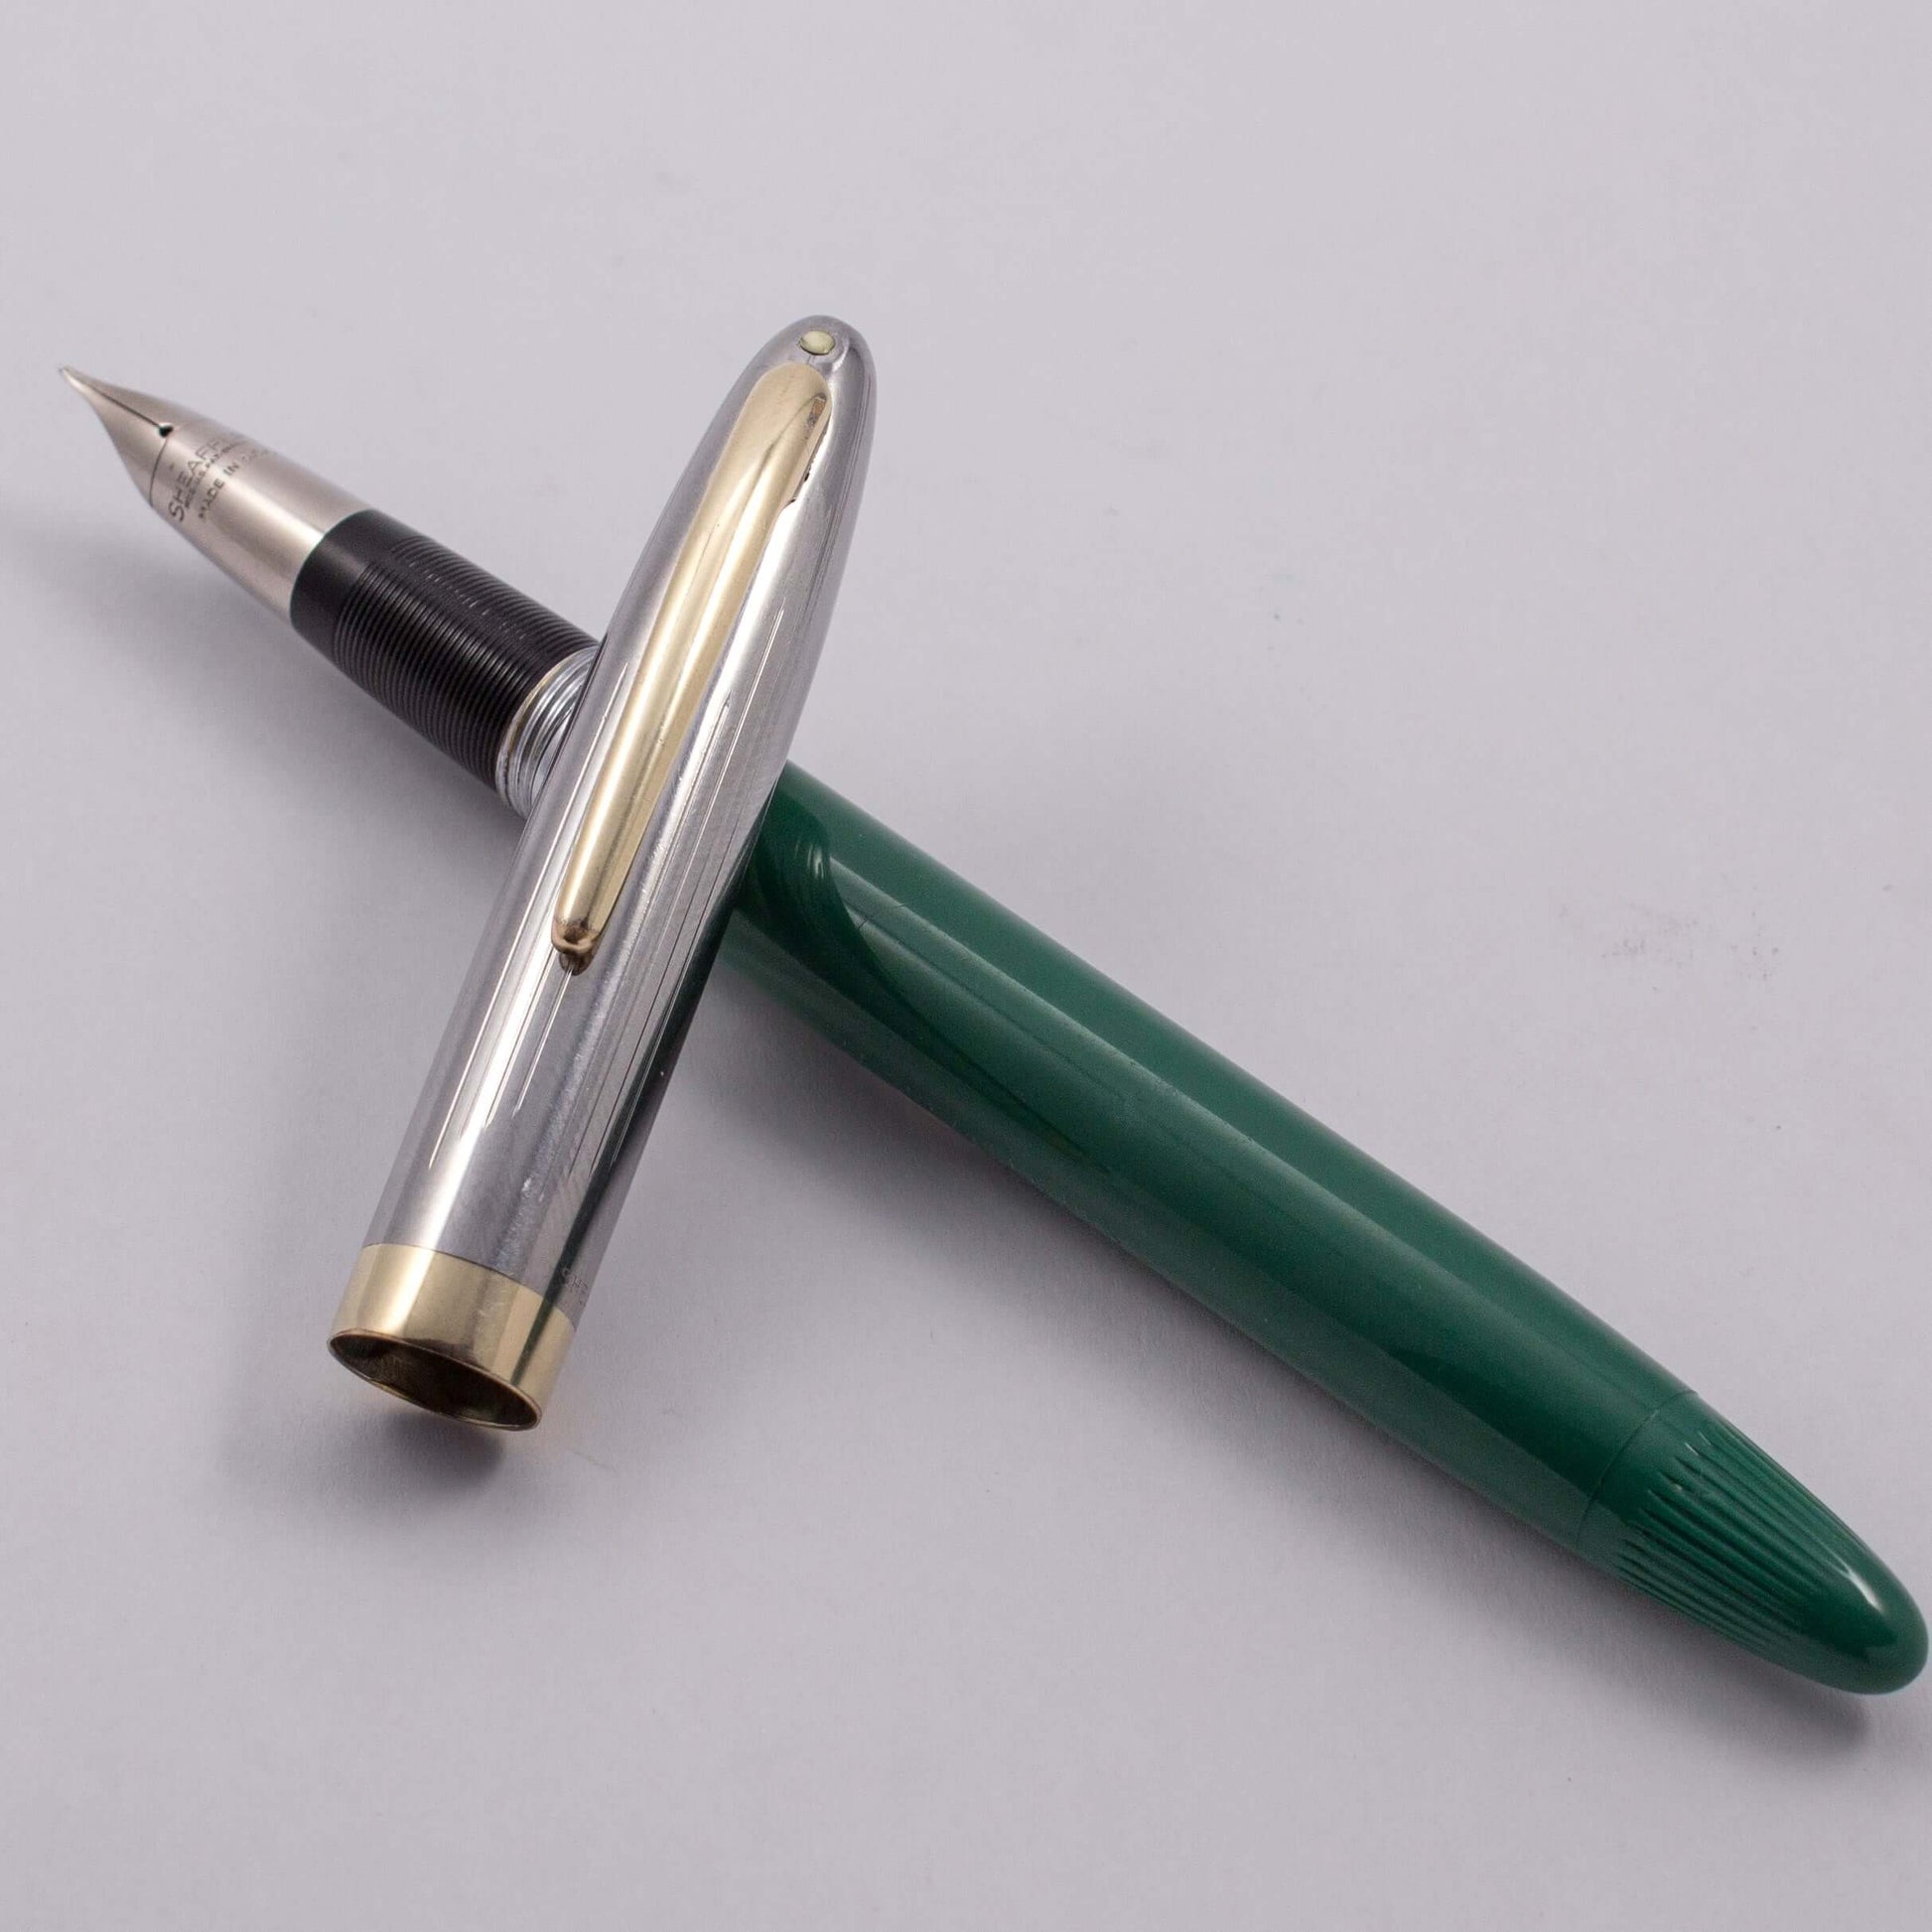 Sheaffer Snorkel Fountain Pen, Clipper, Fine PdAg Triumph Nib, White Dot Type: Restored Vintage Sheaffer Fountain Pen Product Name: Sheaffer Clipper Snorkel Manufacture Year: 1952-1959 Length: 5 9/16 Filling System: Snorkel Filler, Restored with new sac a